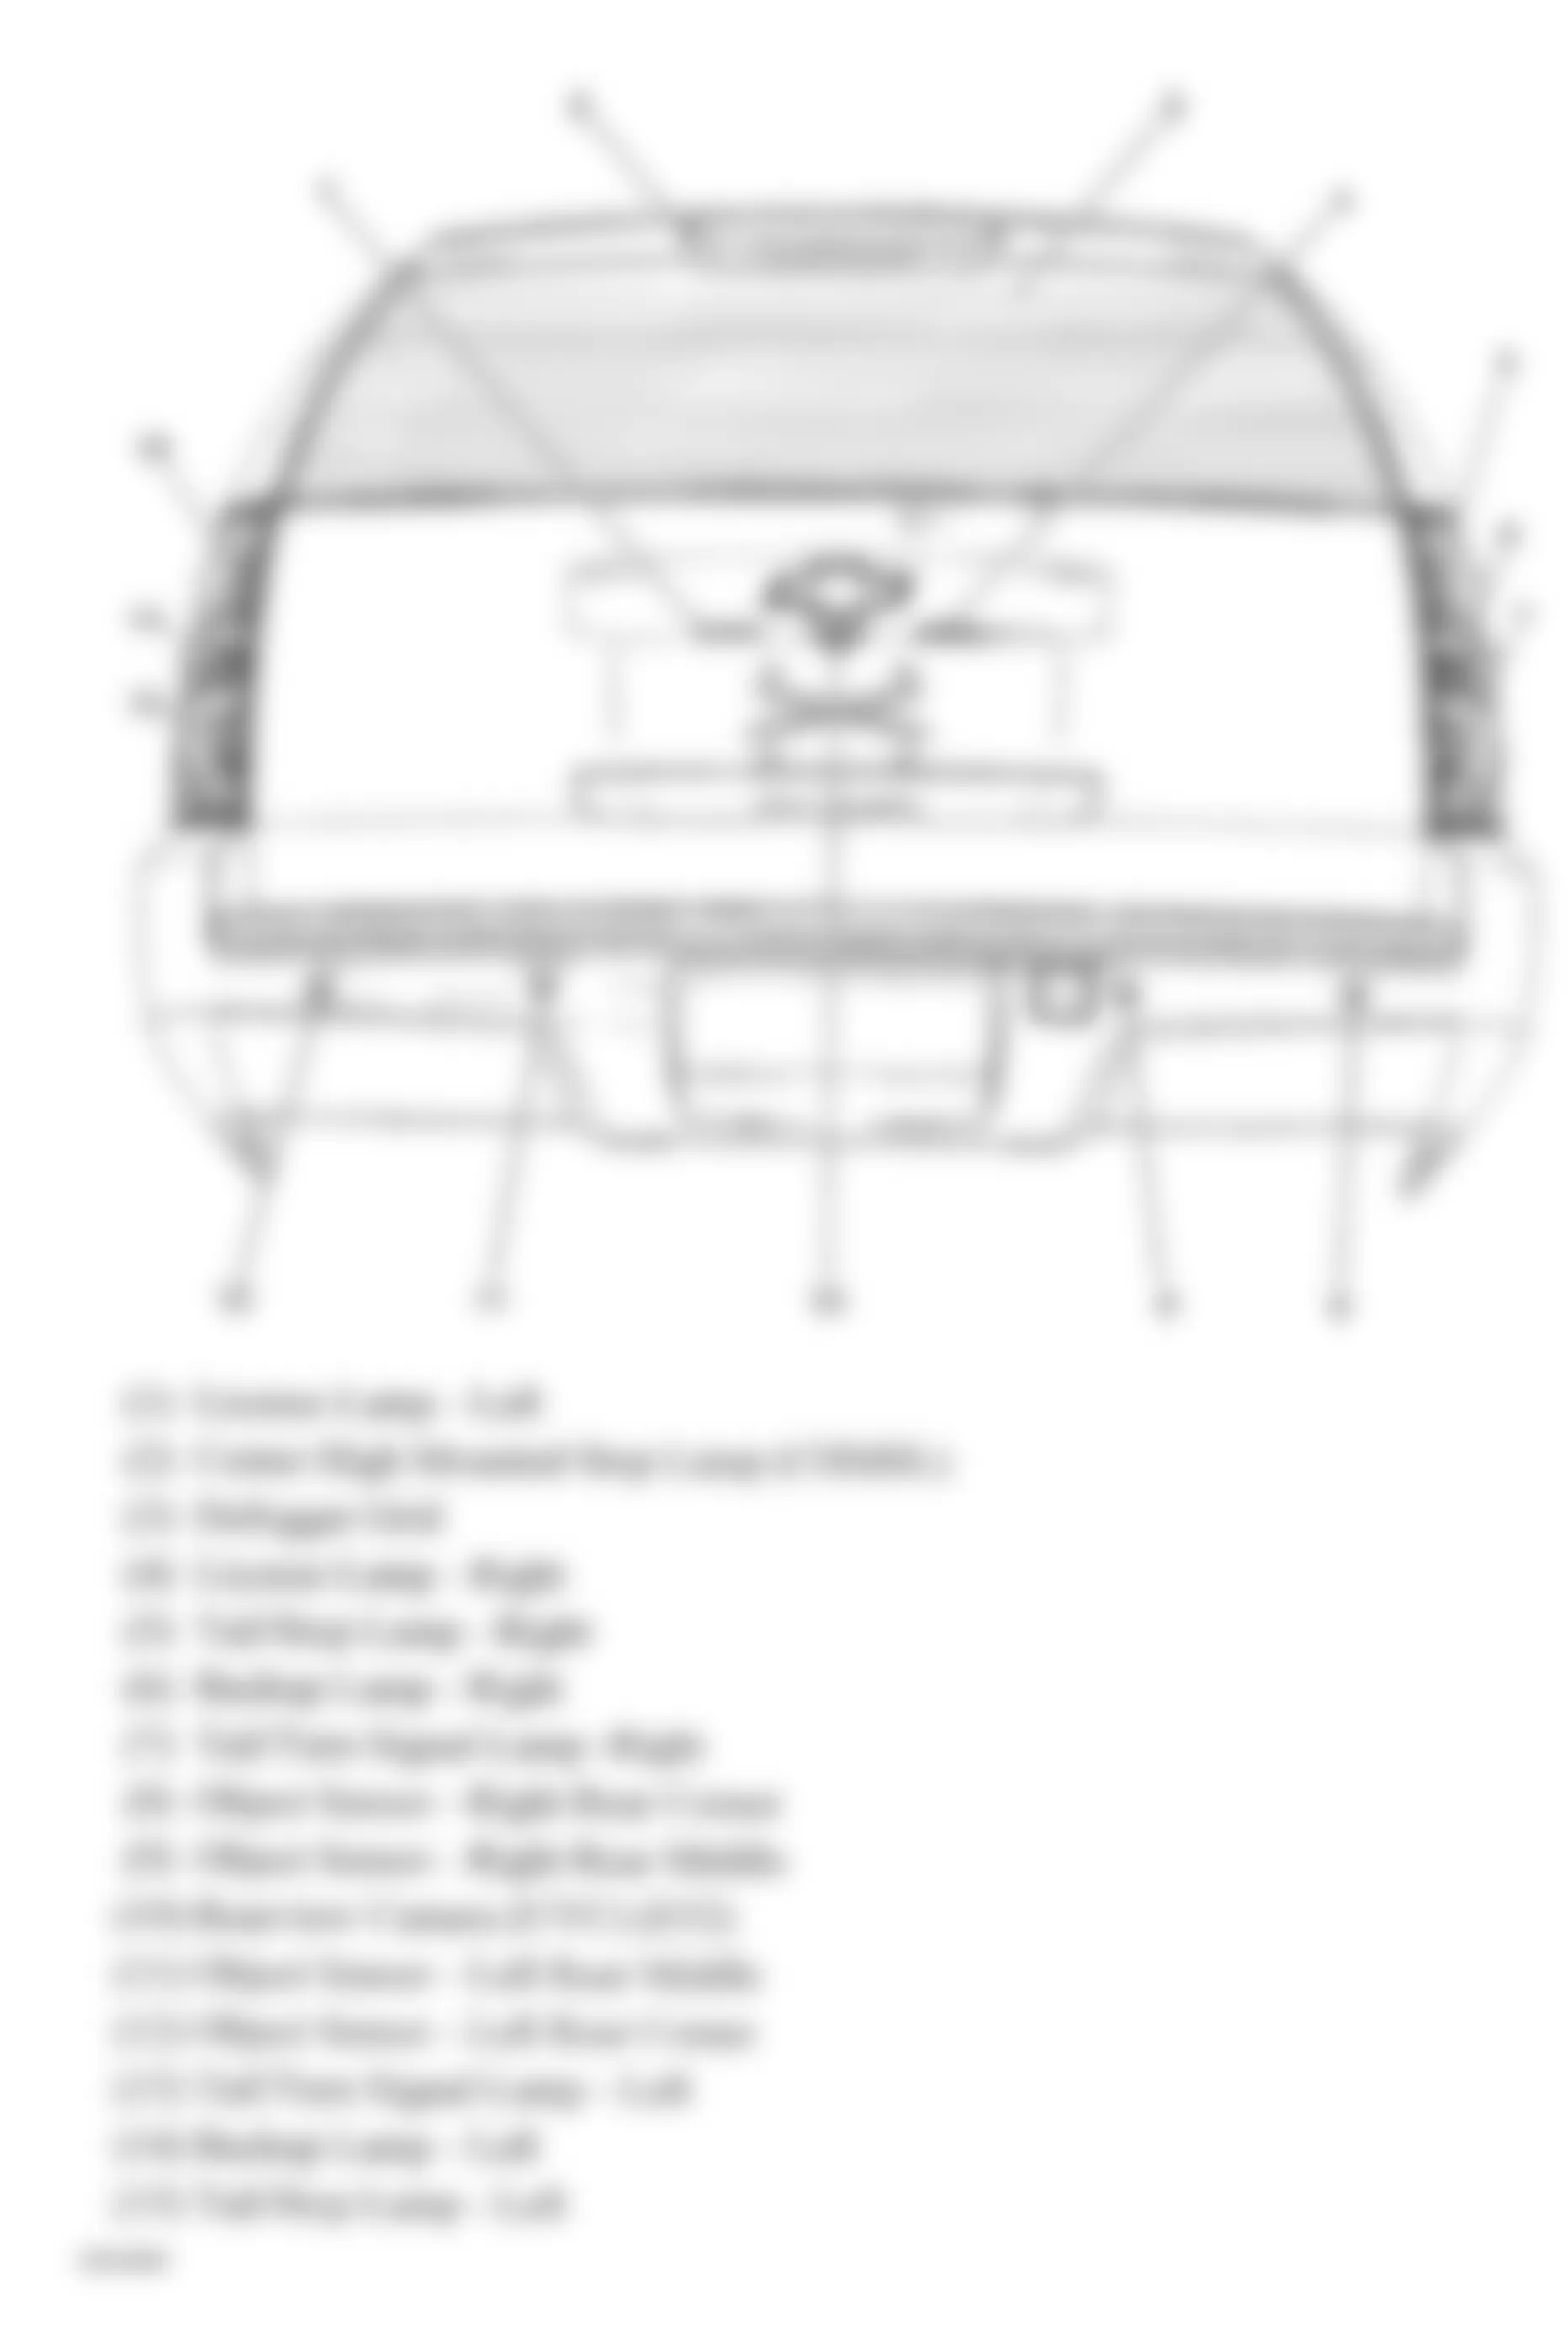 GMC Yukon 2007 - Component Locations -  Rear Of Vehicle (Avalanche, Suburban & Tahoe W/One Piece Liftgate)